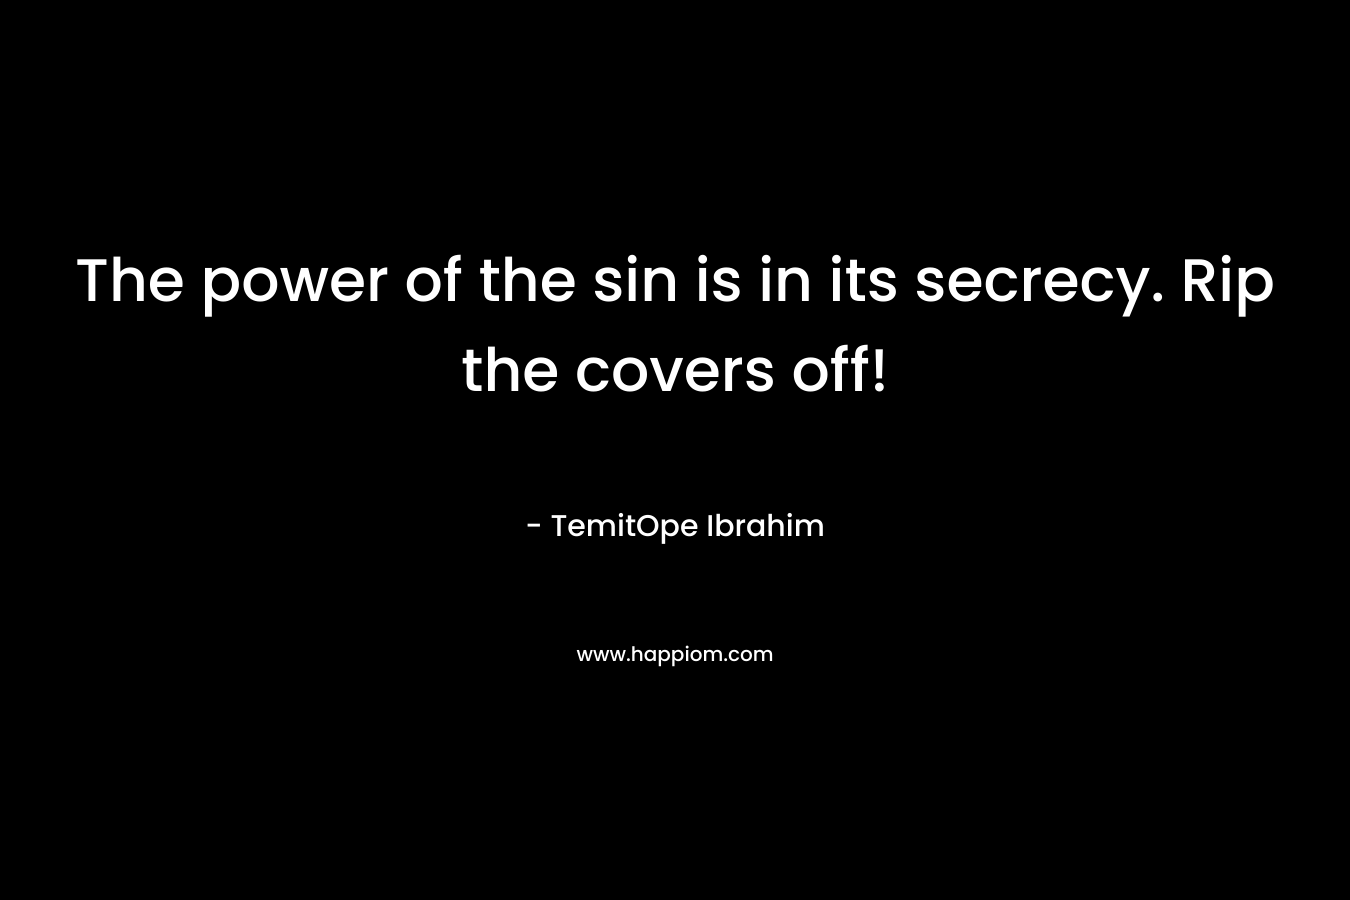 The power of the sin is in its secrecy. Rip the covers off! – TemitOpe Ibrahim